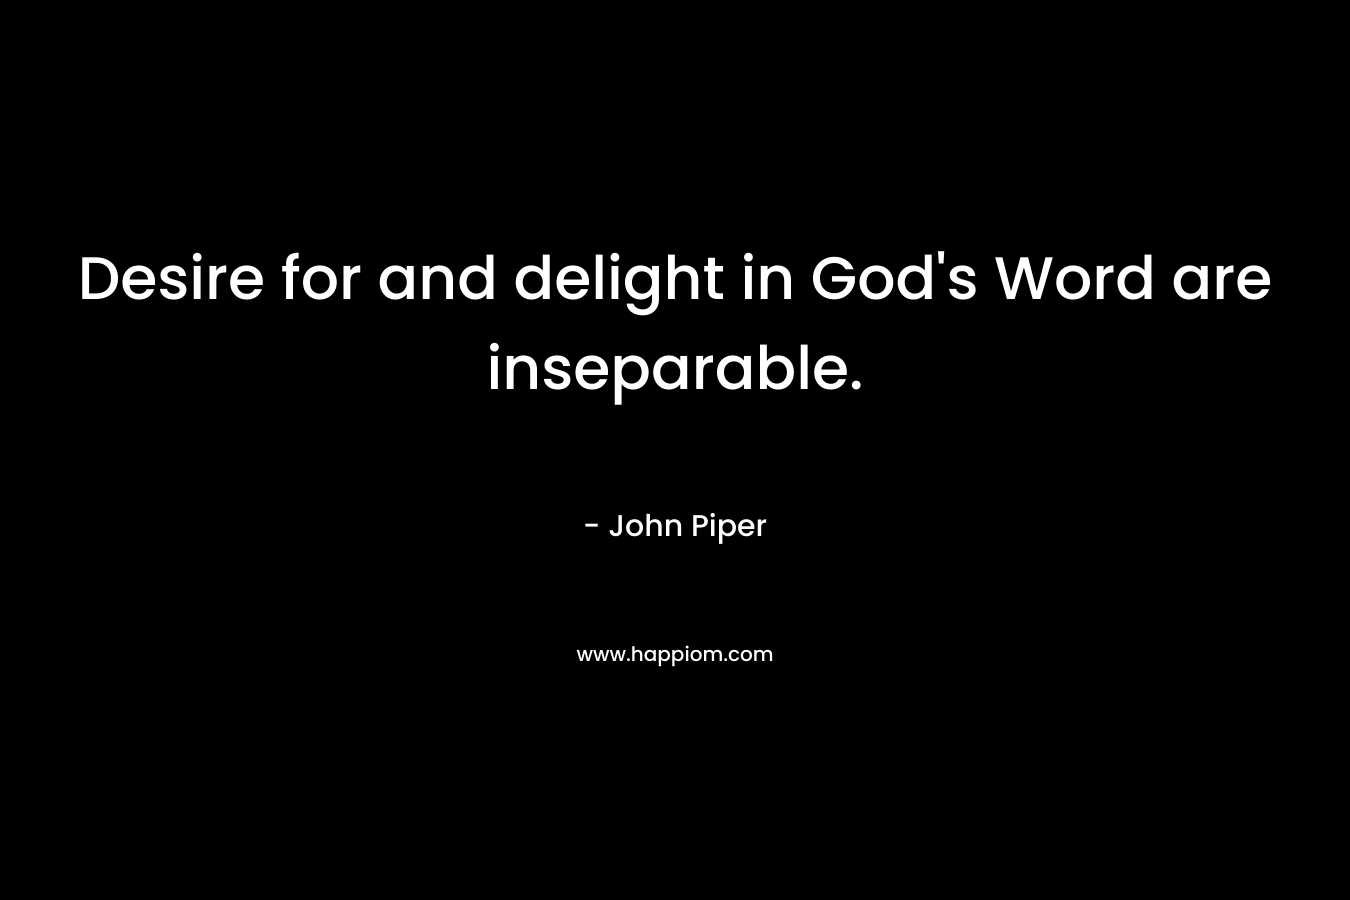 Desire for and delight in God's Word are inseparable.